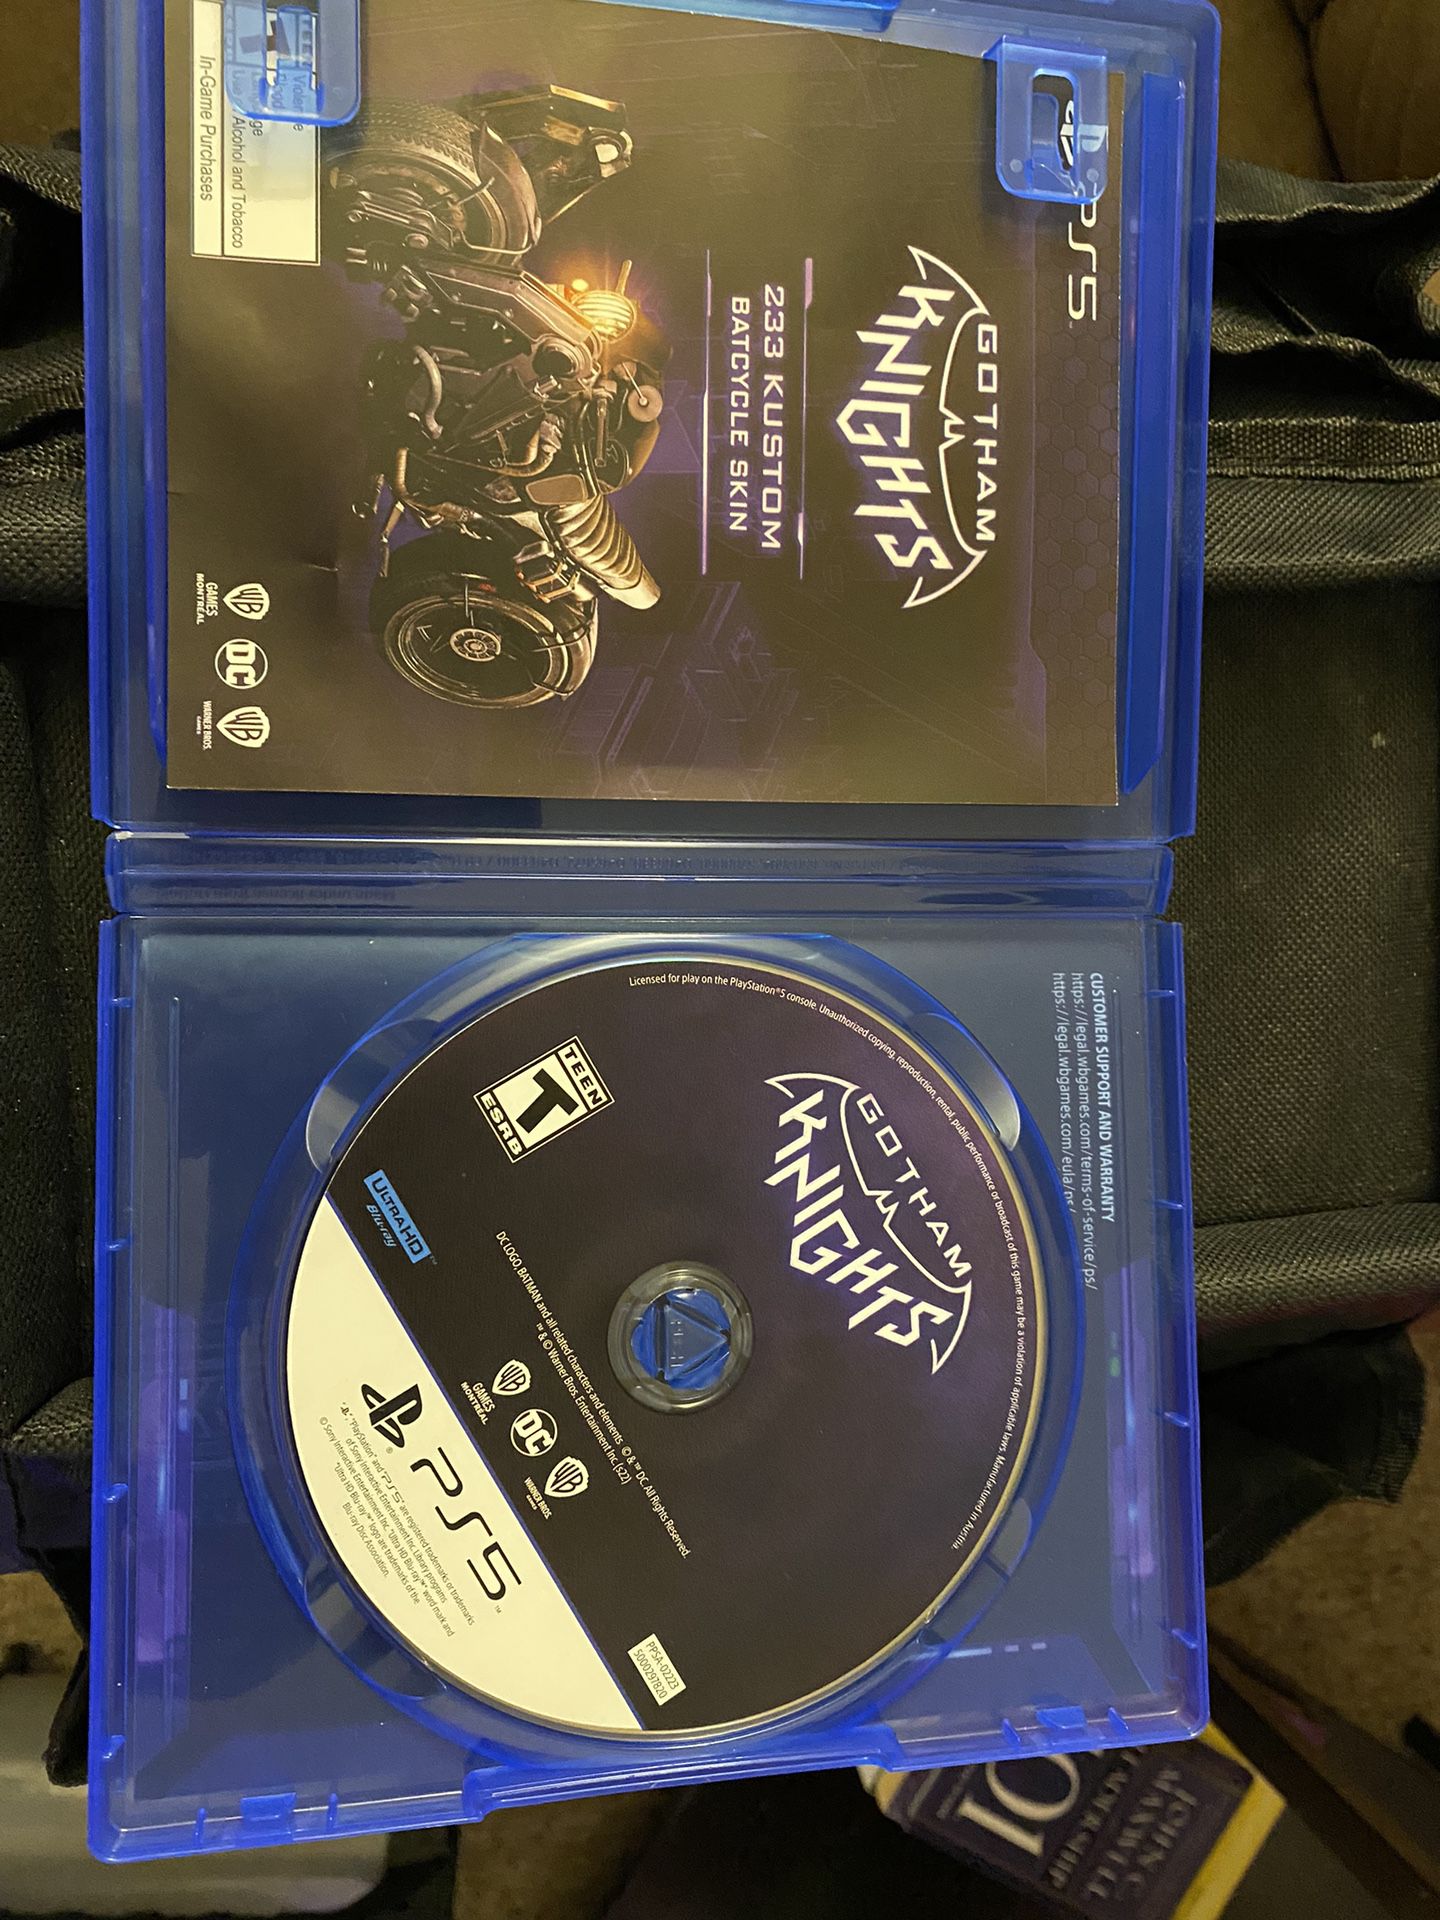 Gotham Knights For PlayStation 5 PS5 for Sale in Fontana, CA - OfferUp